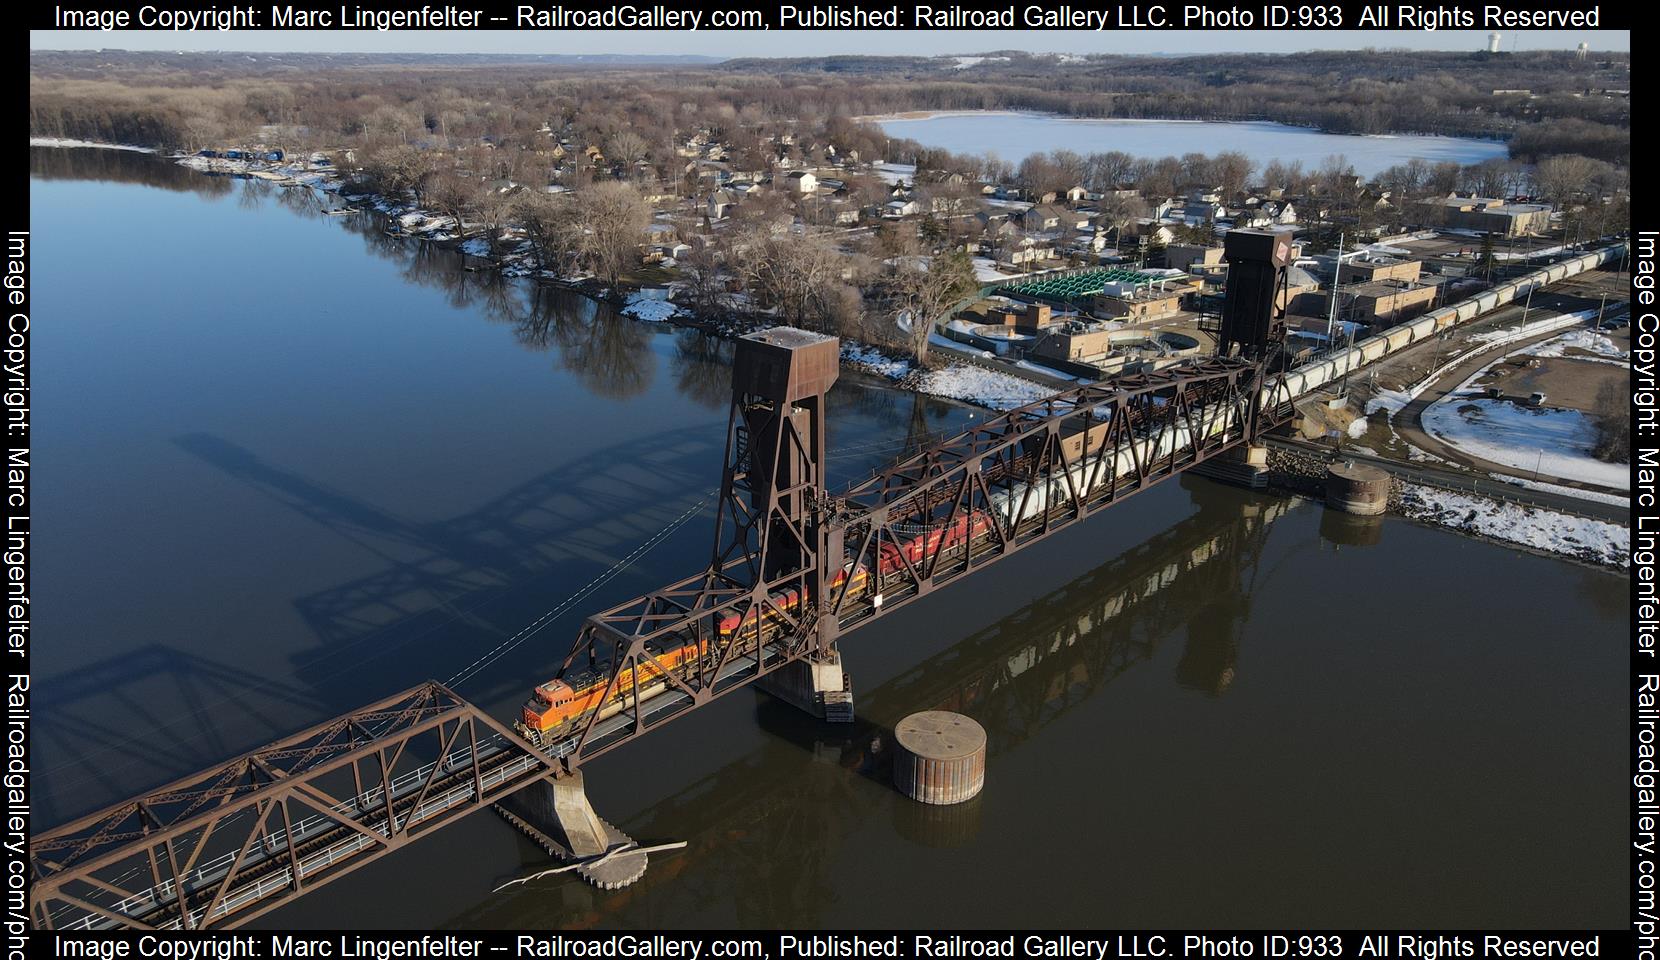 BNSF 7291 is a class GE Unknown and  is pictured in Hastings, Minnesota, USA.  This was taken along the CP River Sub on the BNSF Railway. Photo Copyright: Marc Lingenfelter uploaded to Railroad Gallery on 04/07/2023. This photograph of BNSF 7291 was taken on Thursday, March 23, 2023. All Rights Reserved. 